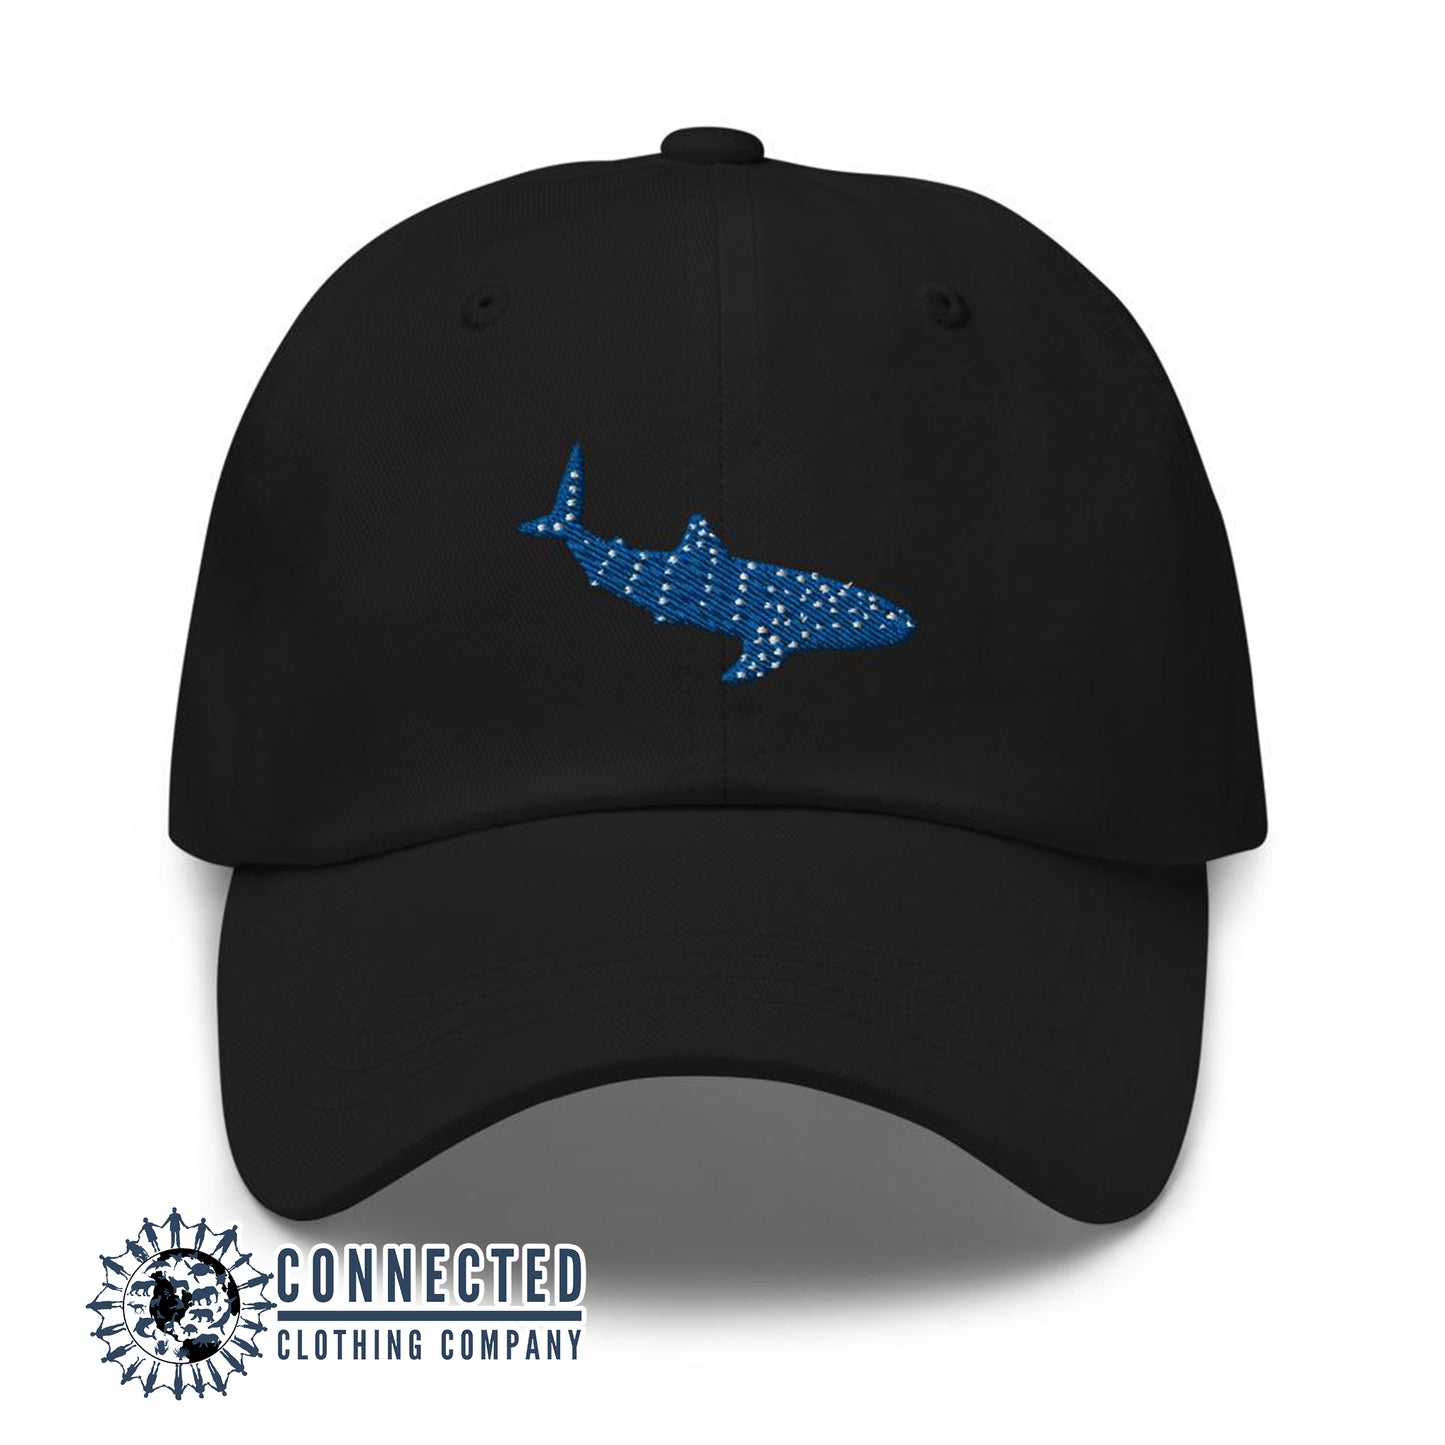 Black Whale Shark Cotton Cap - Connected Clothing Company - Ethically and Sustainably Made - 10% donated to Mission Blue ocean conservation